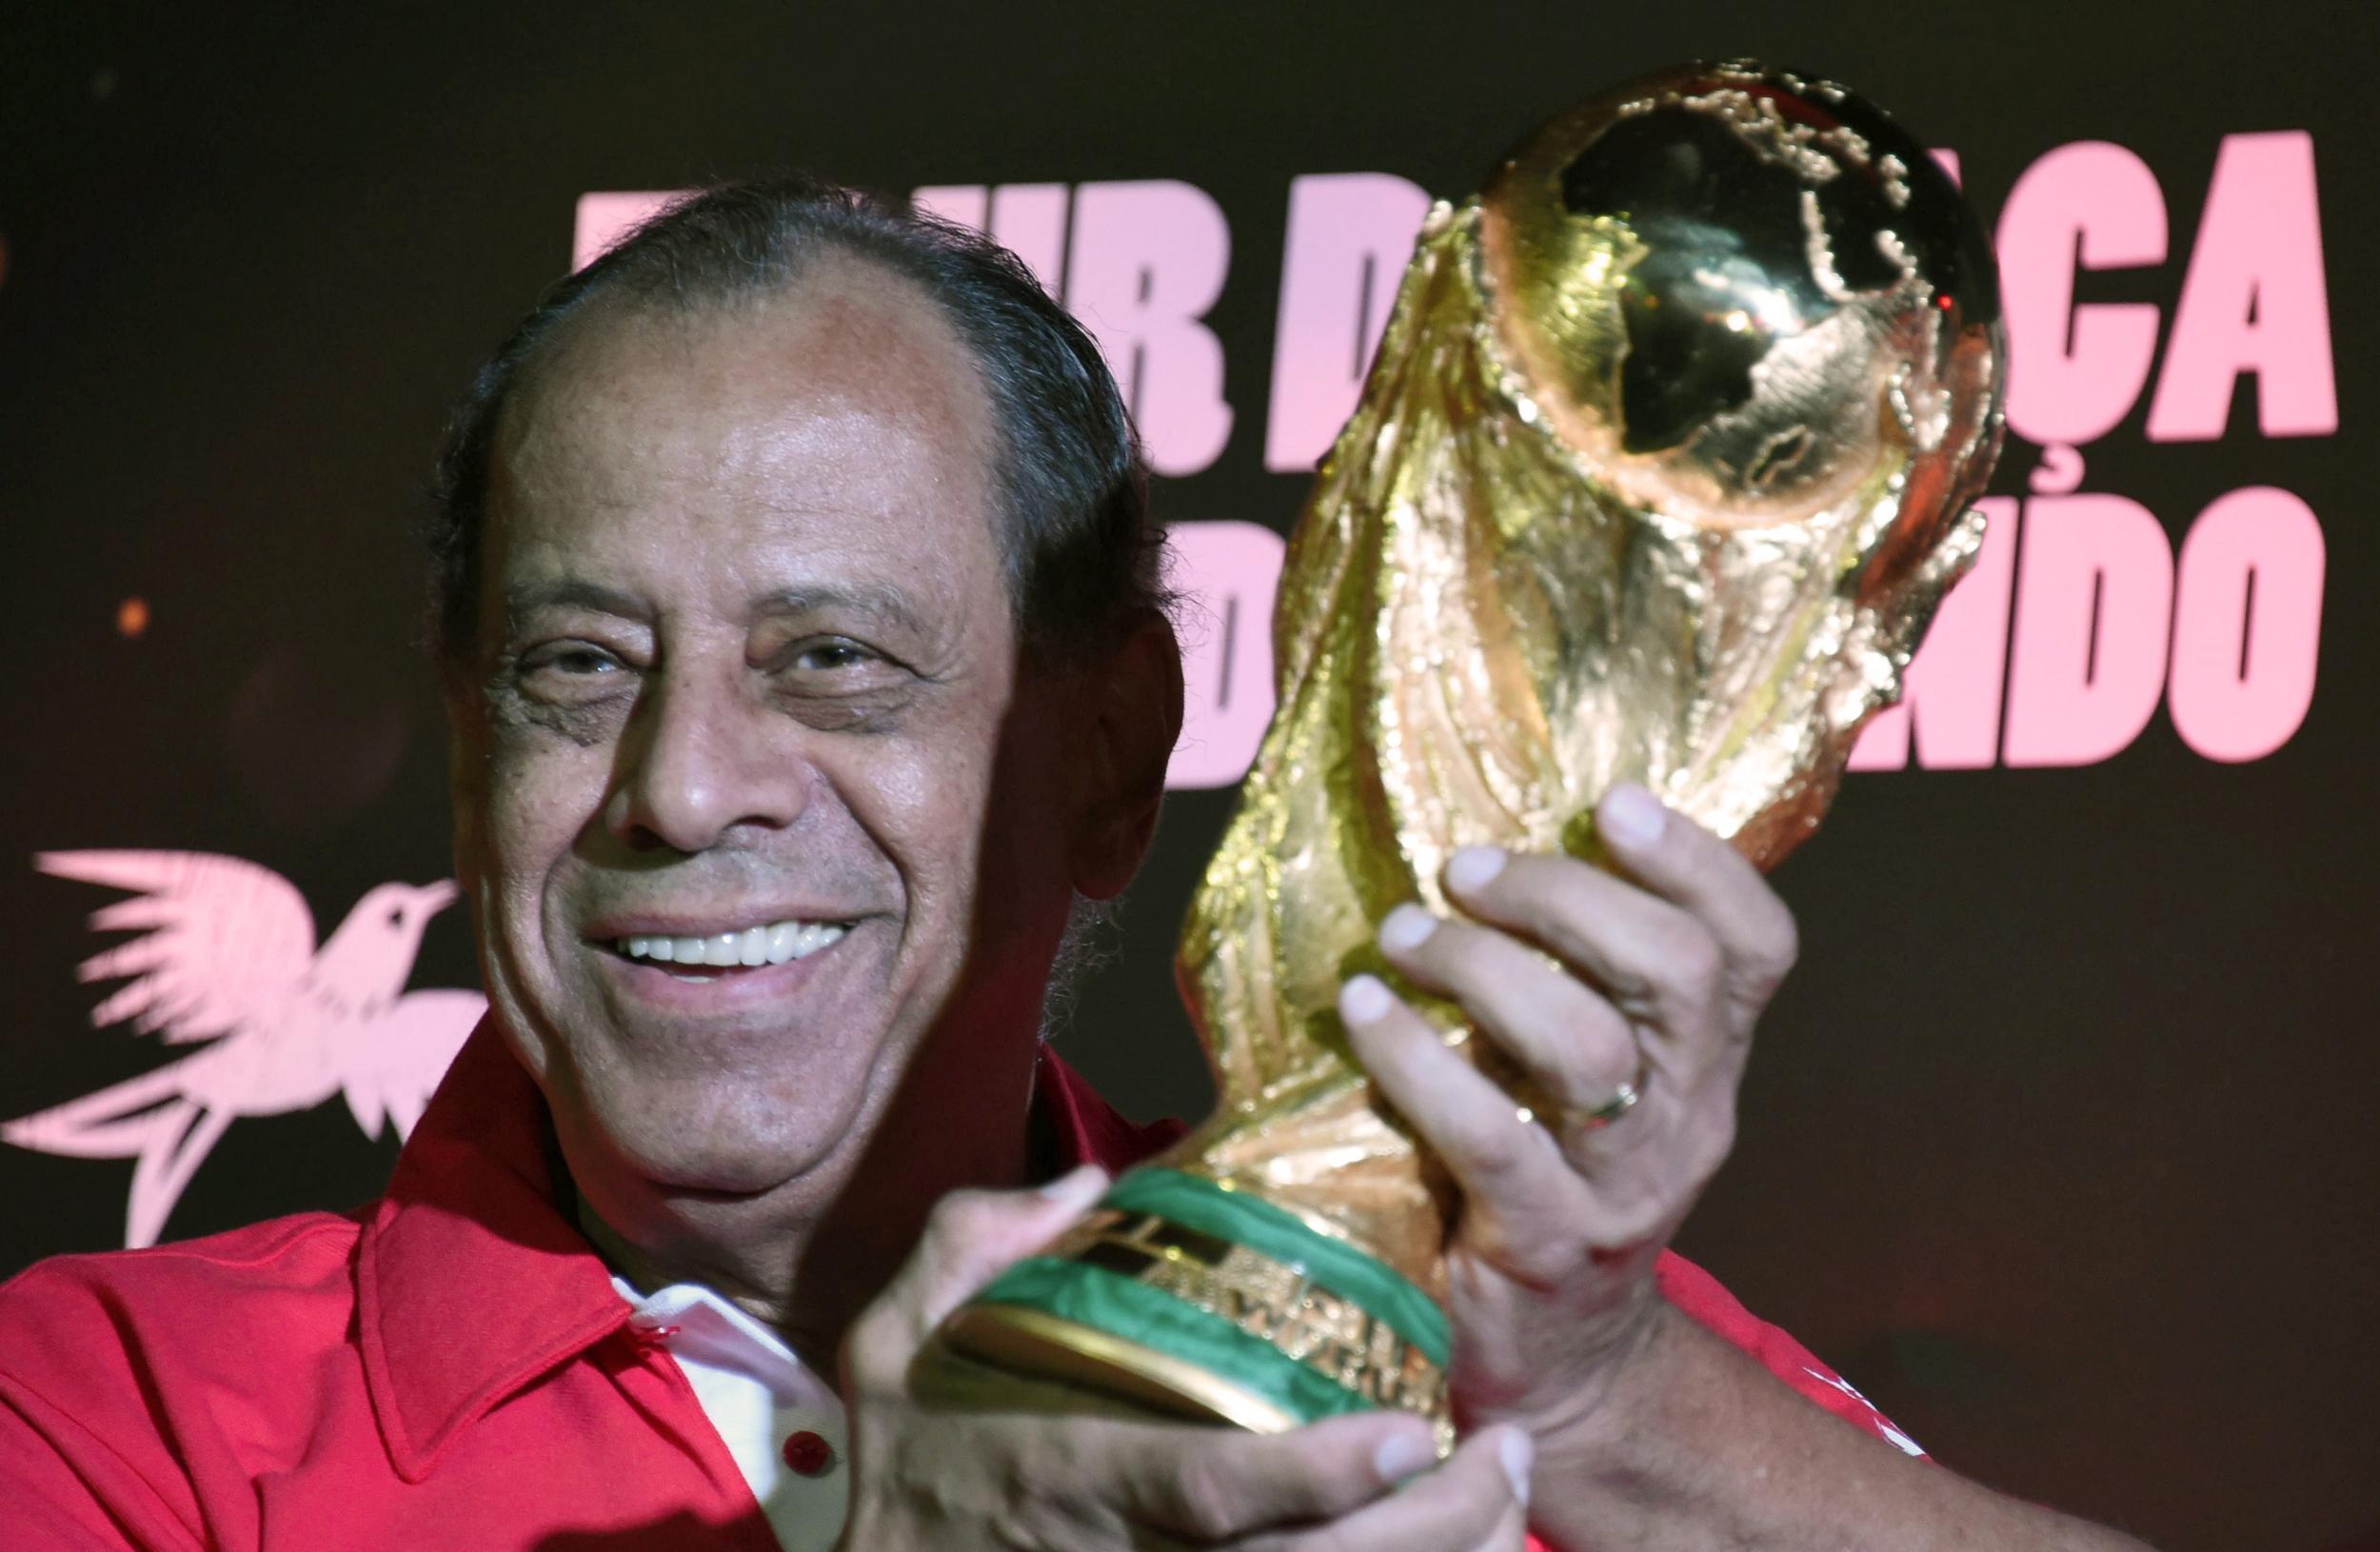 The former captain of the 1970 Brazil side has died of a heart attack